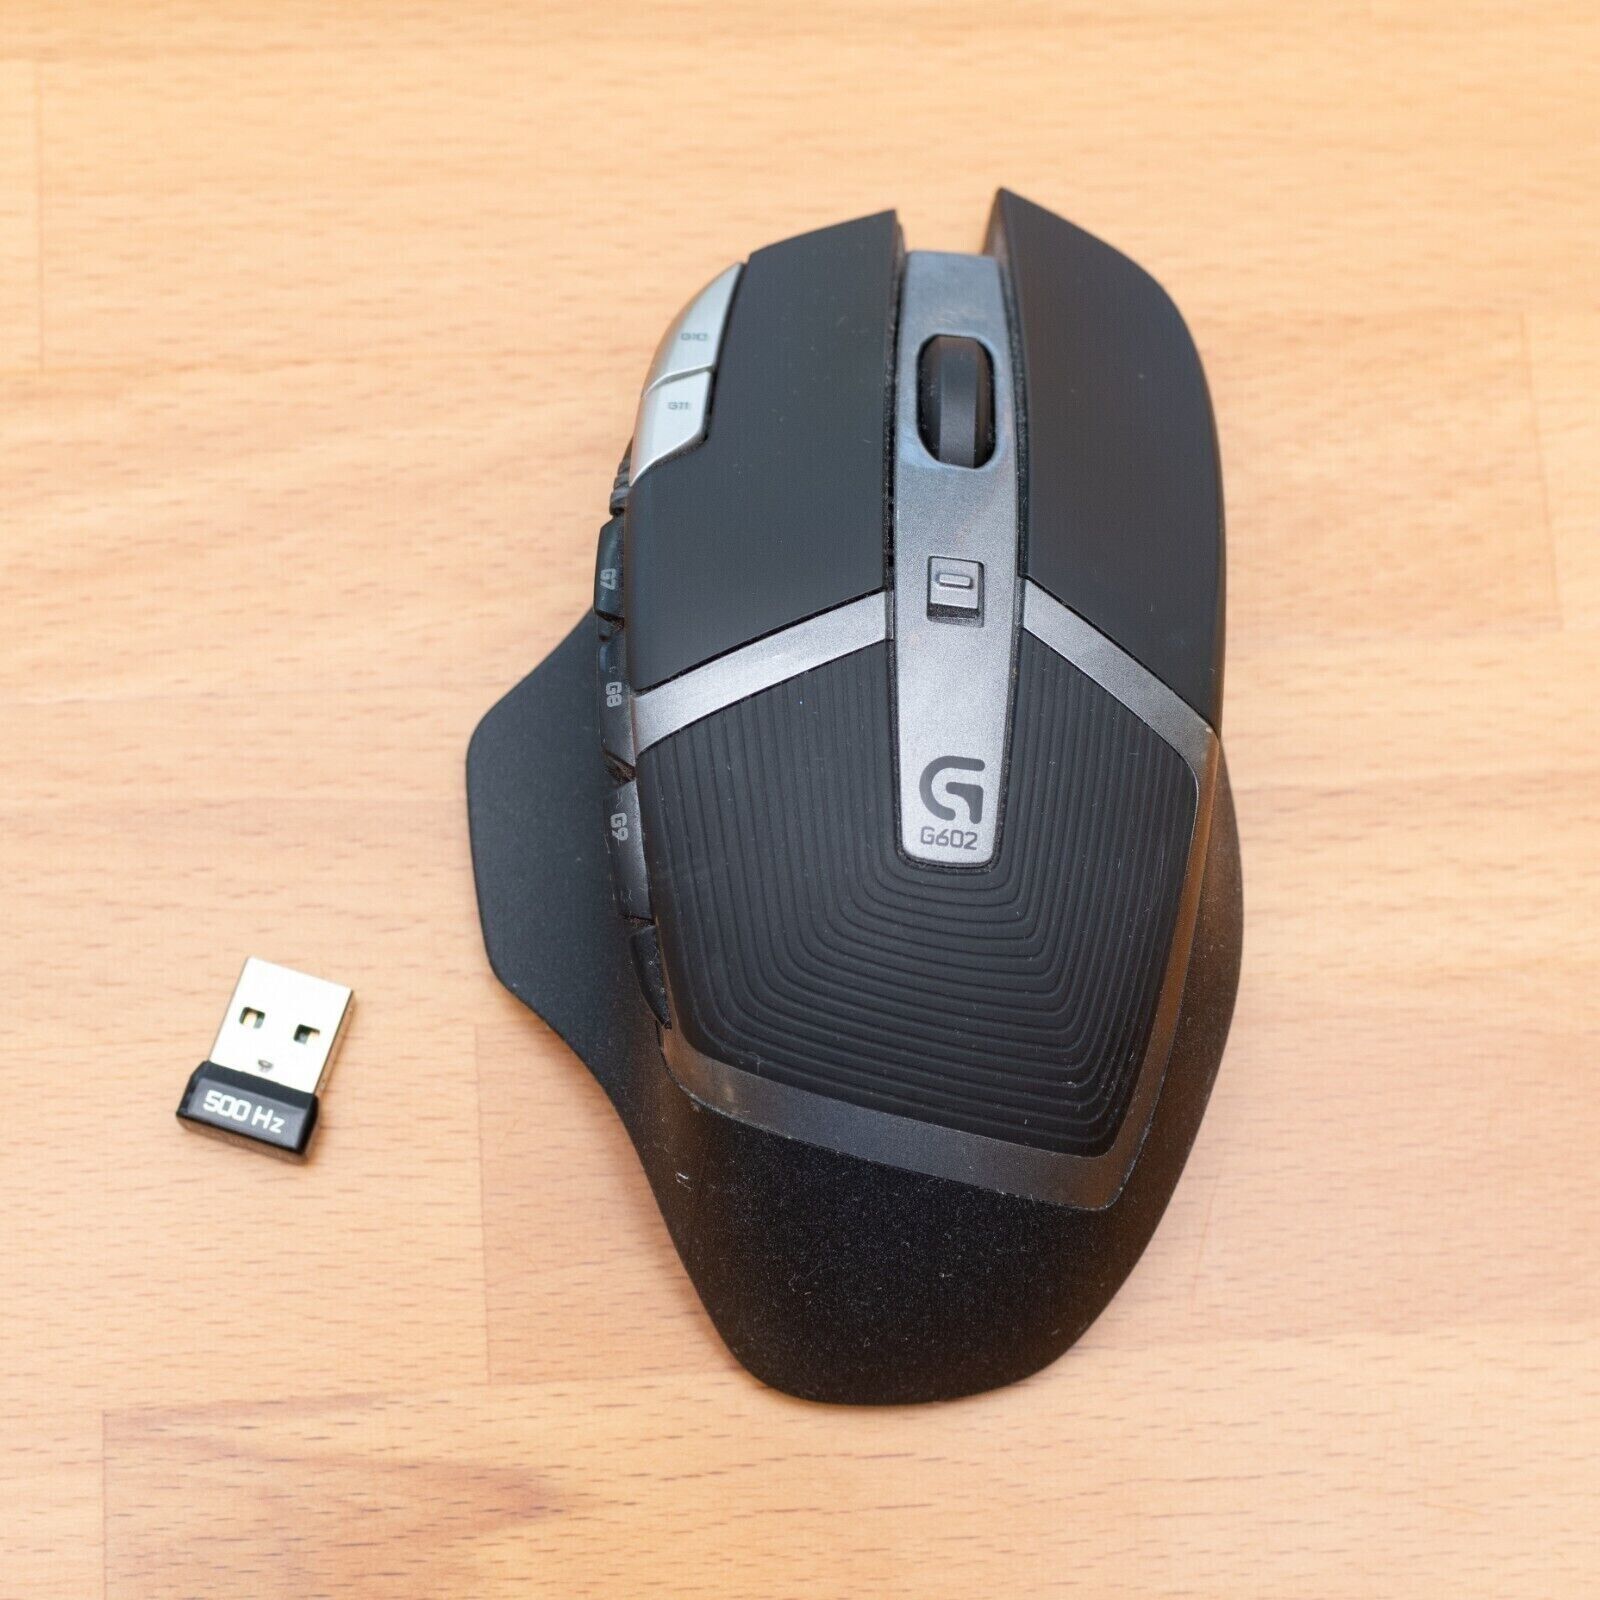 Logitech G602 Wireless Gaming Mouse W/ USB Dongle Receiver Great Condition